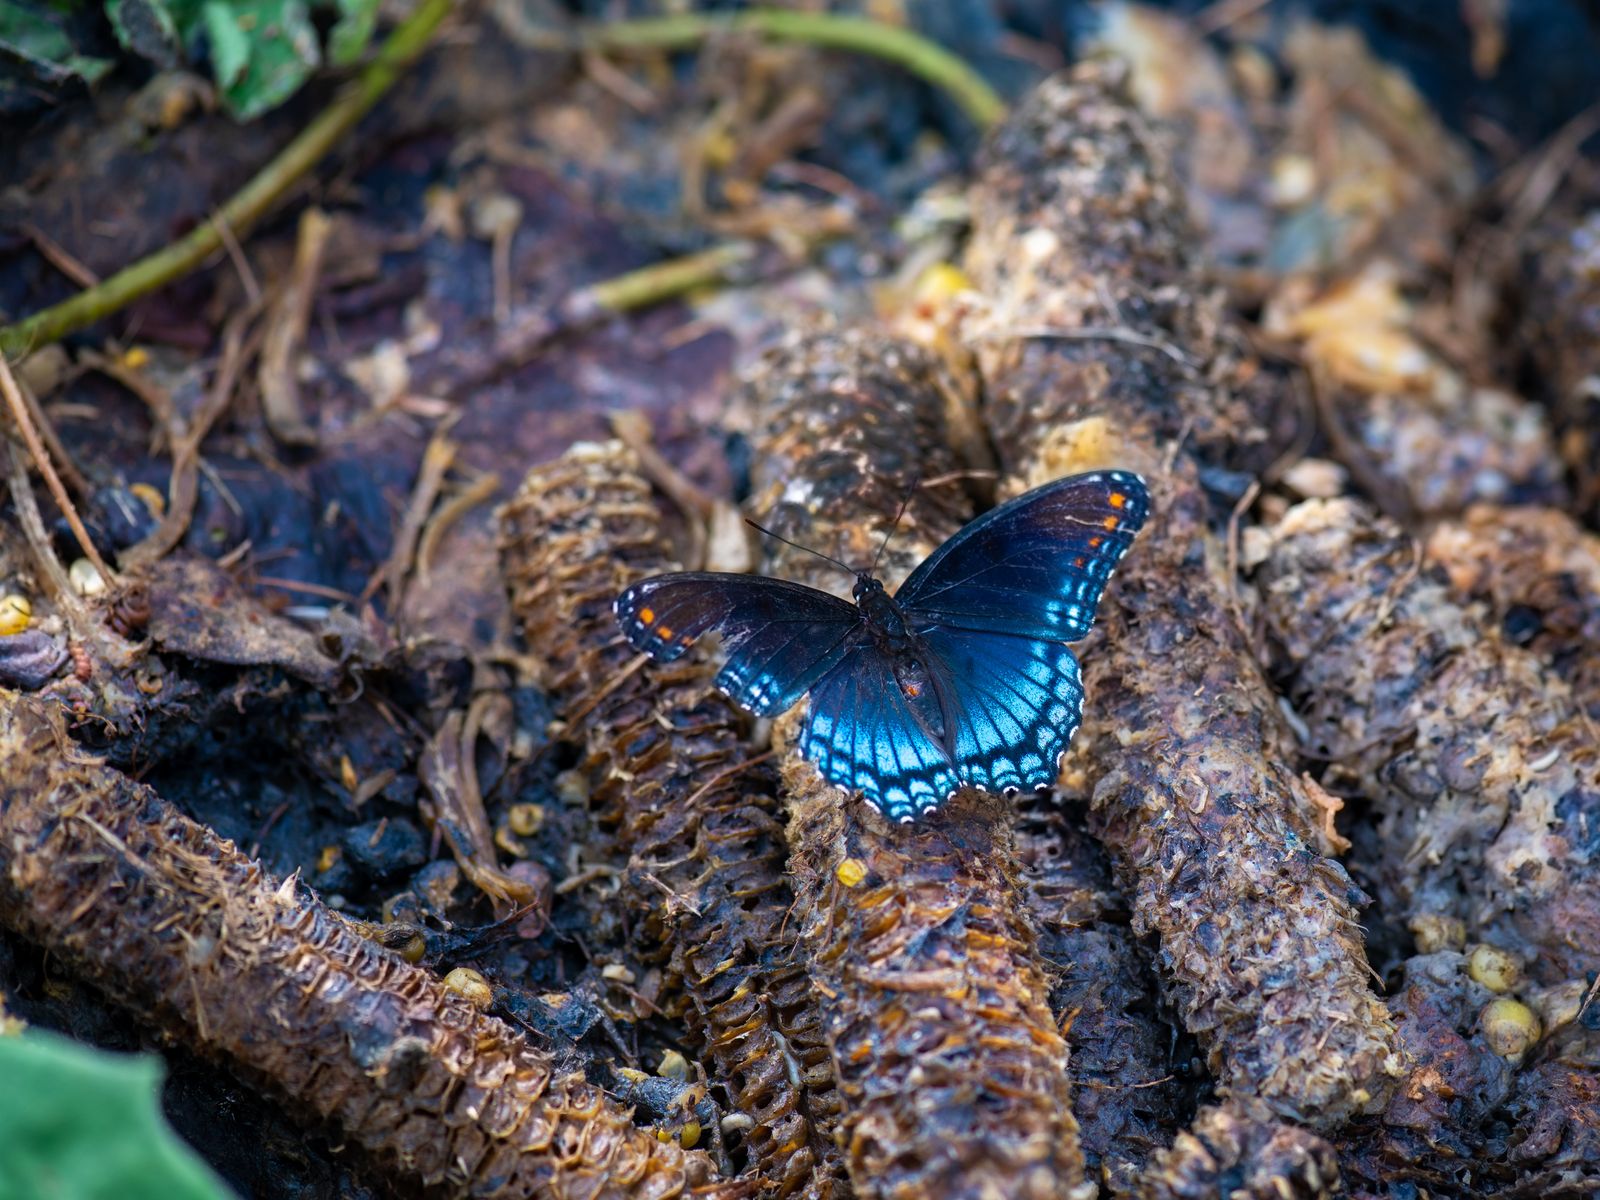 © Michael Young - Damaged Butterfly on Compost Heap